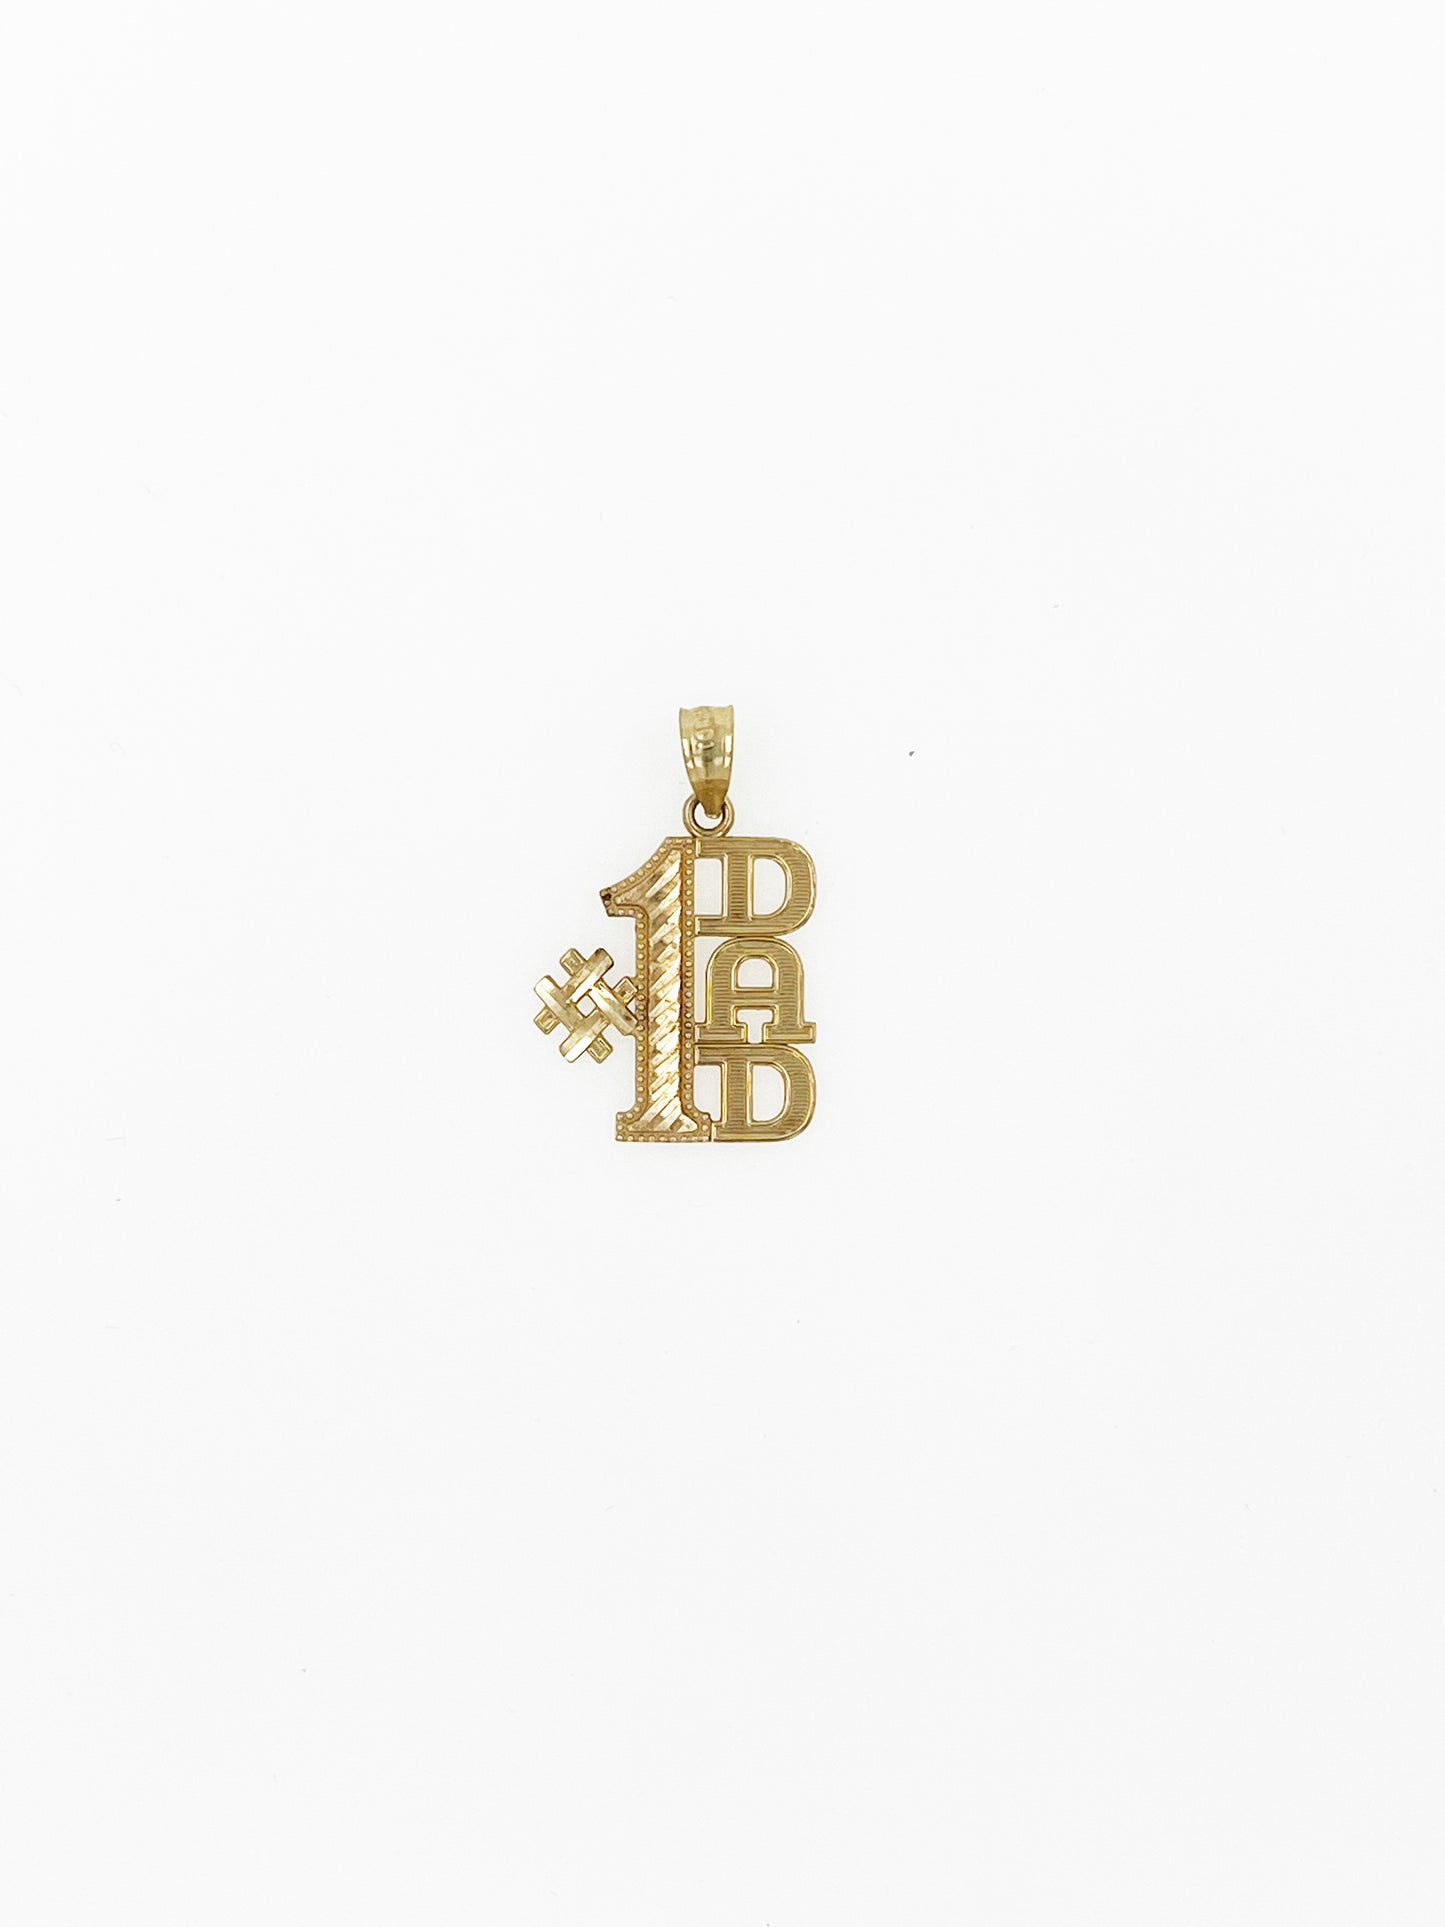 #1 Dad Pendant in 10k Yellow Gold